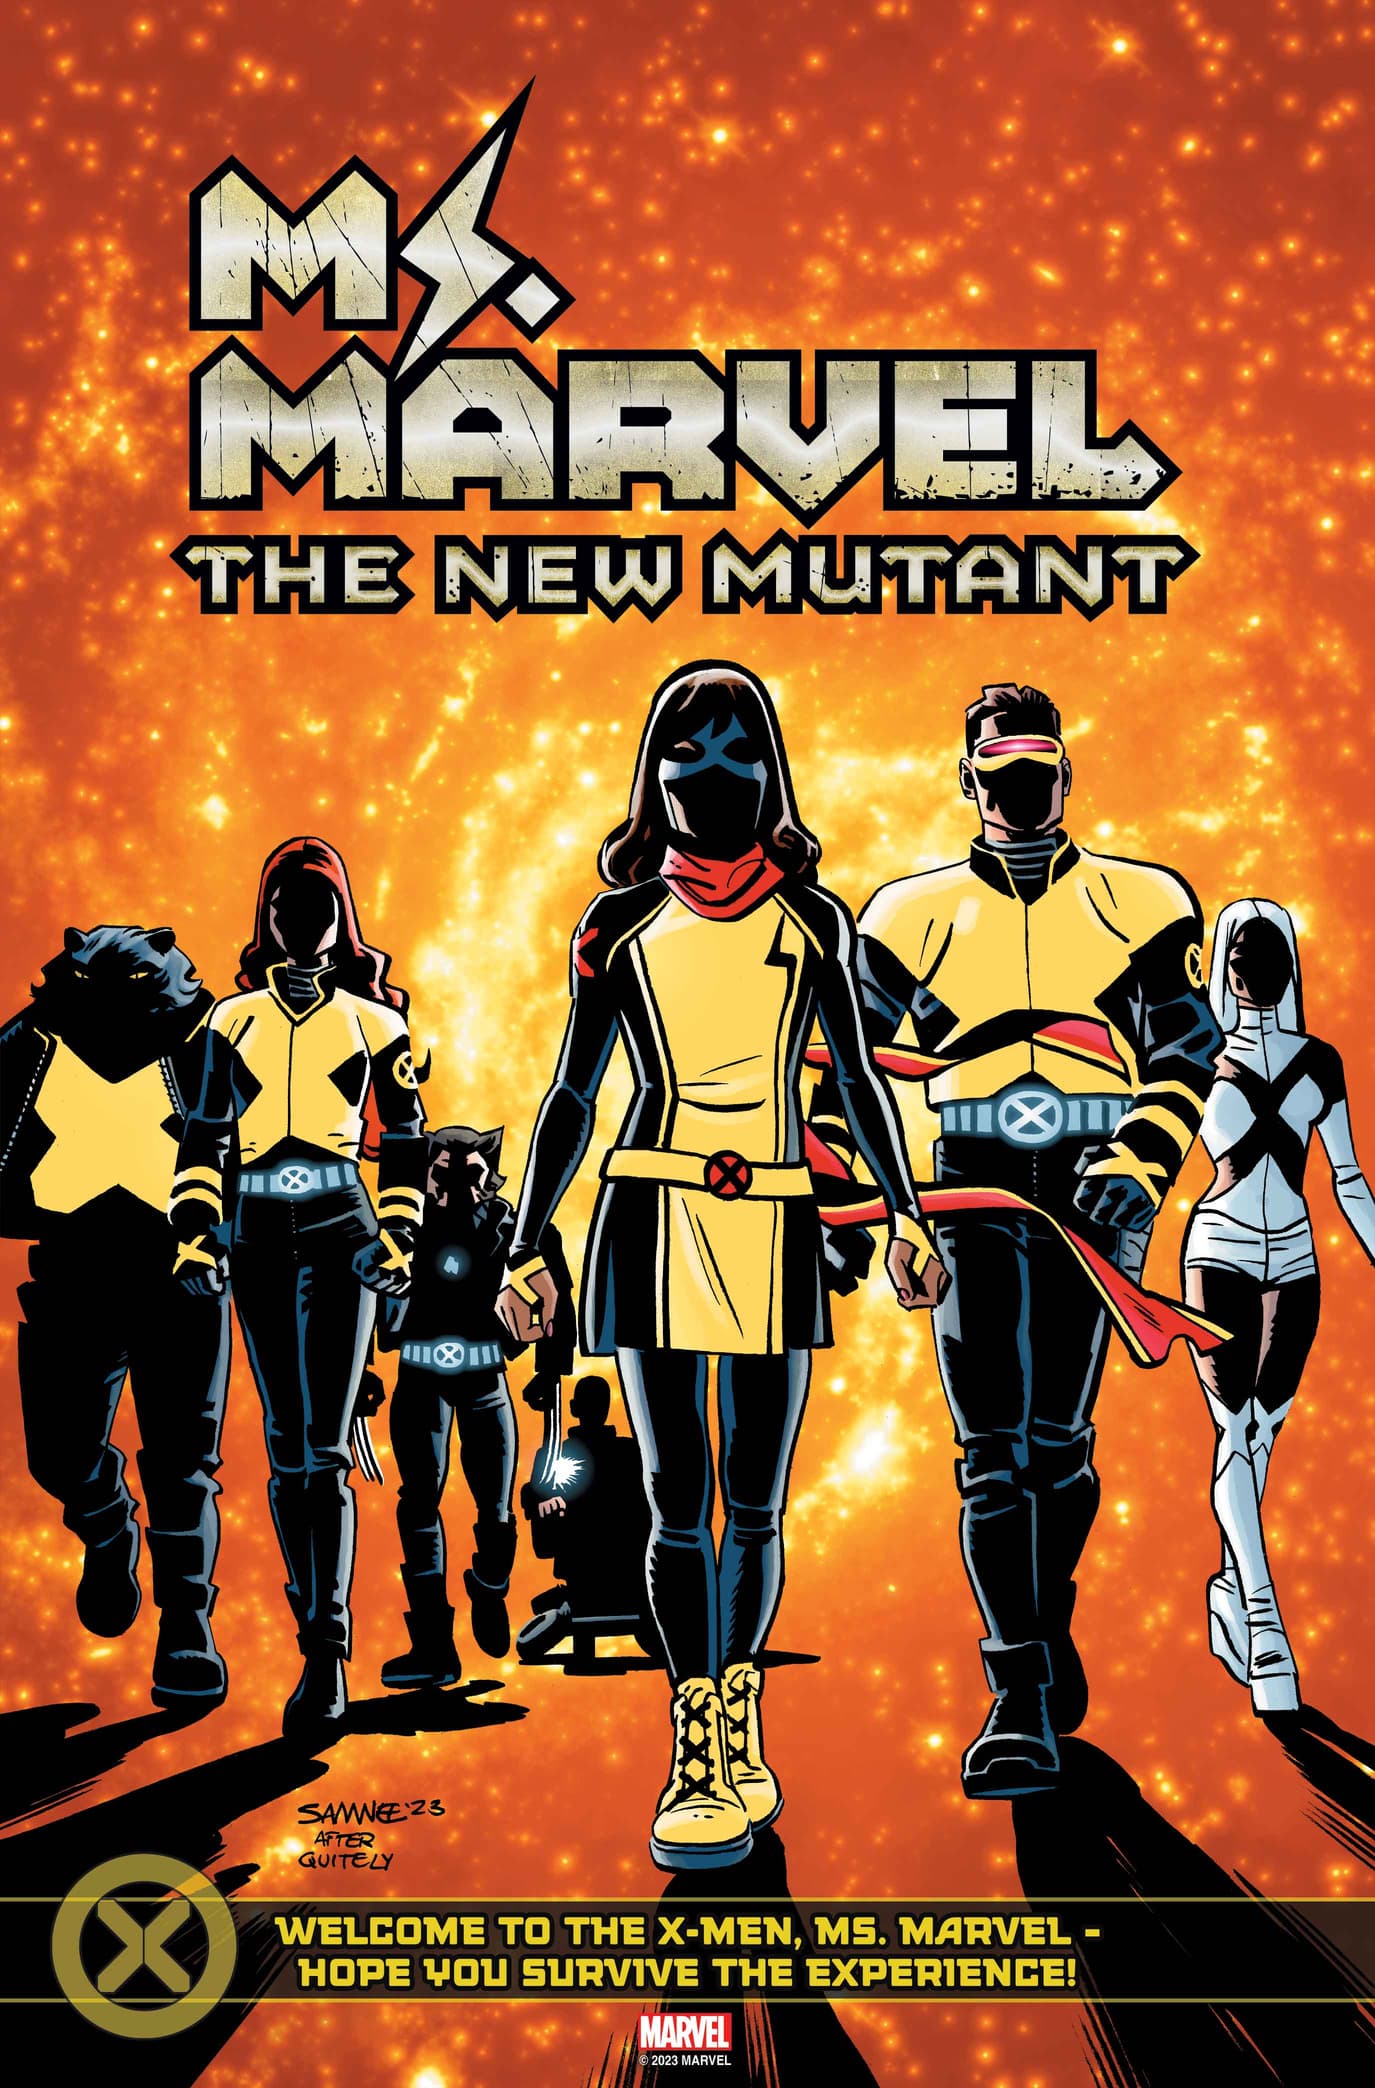 MS. MARVEL: THE NEW MUTANT #4 Team Homage Variant Cover by Chris Samnee